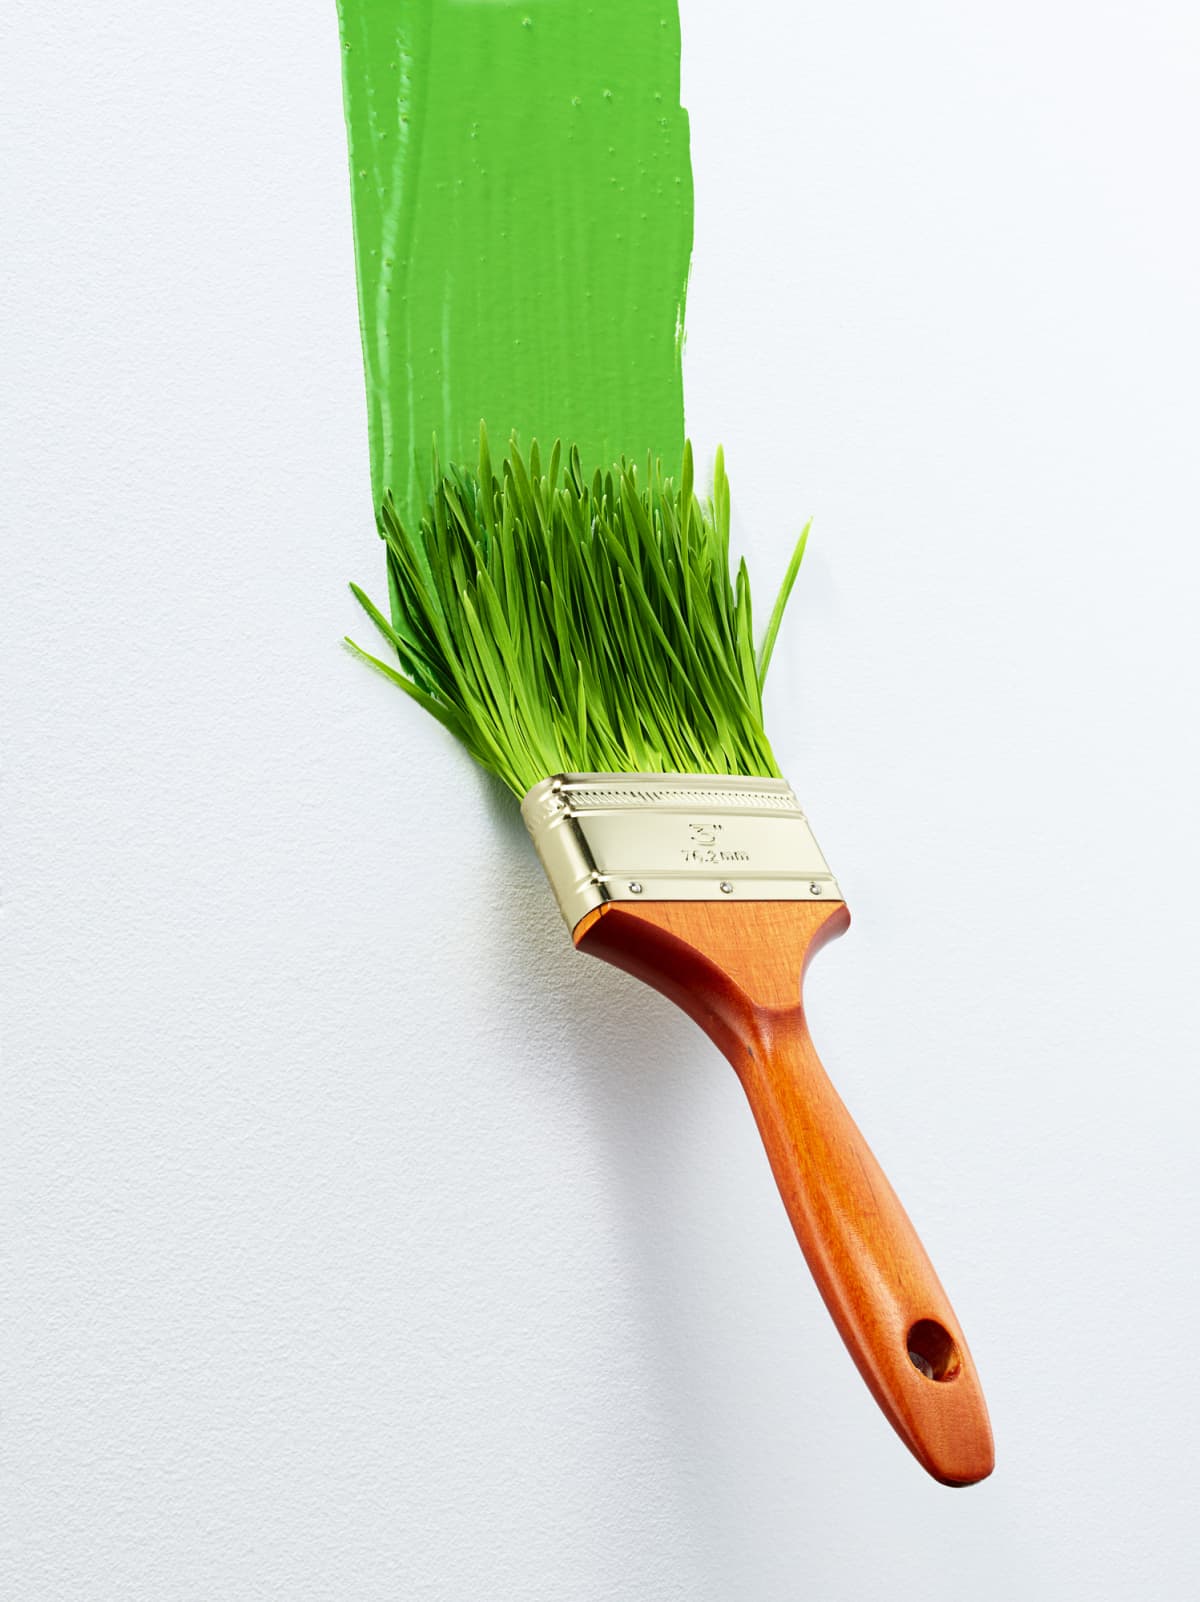 Painting a wall green with a paintbrush